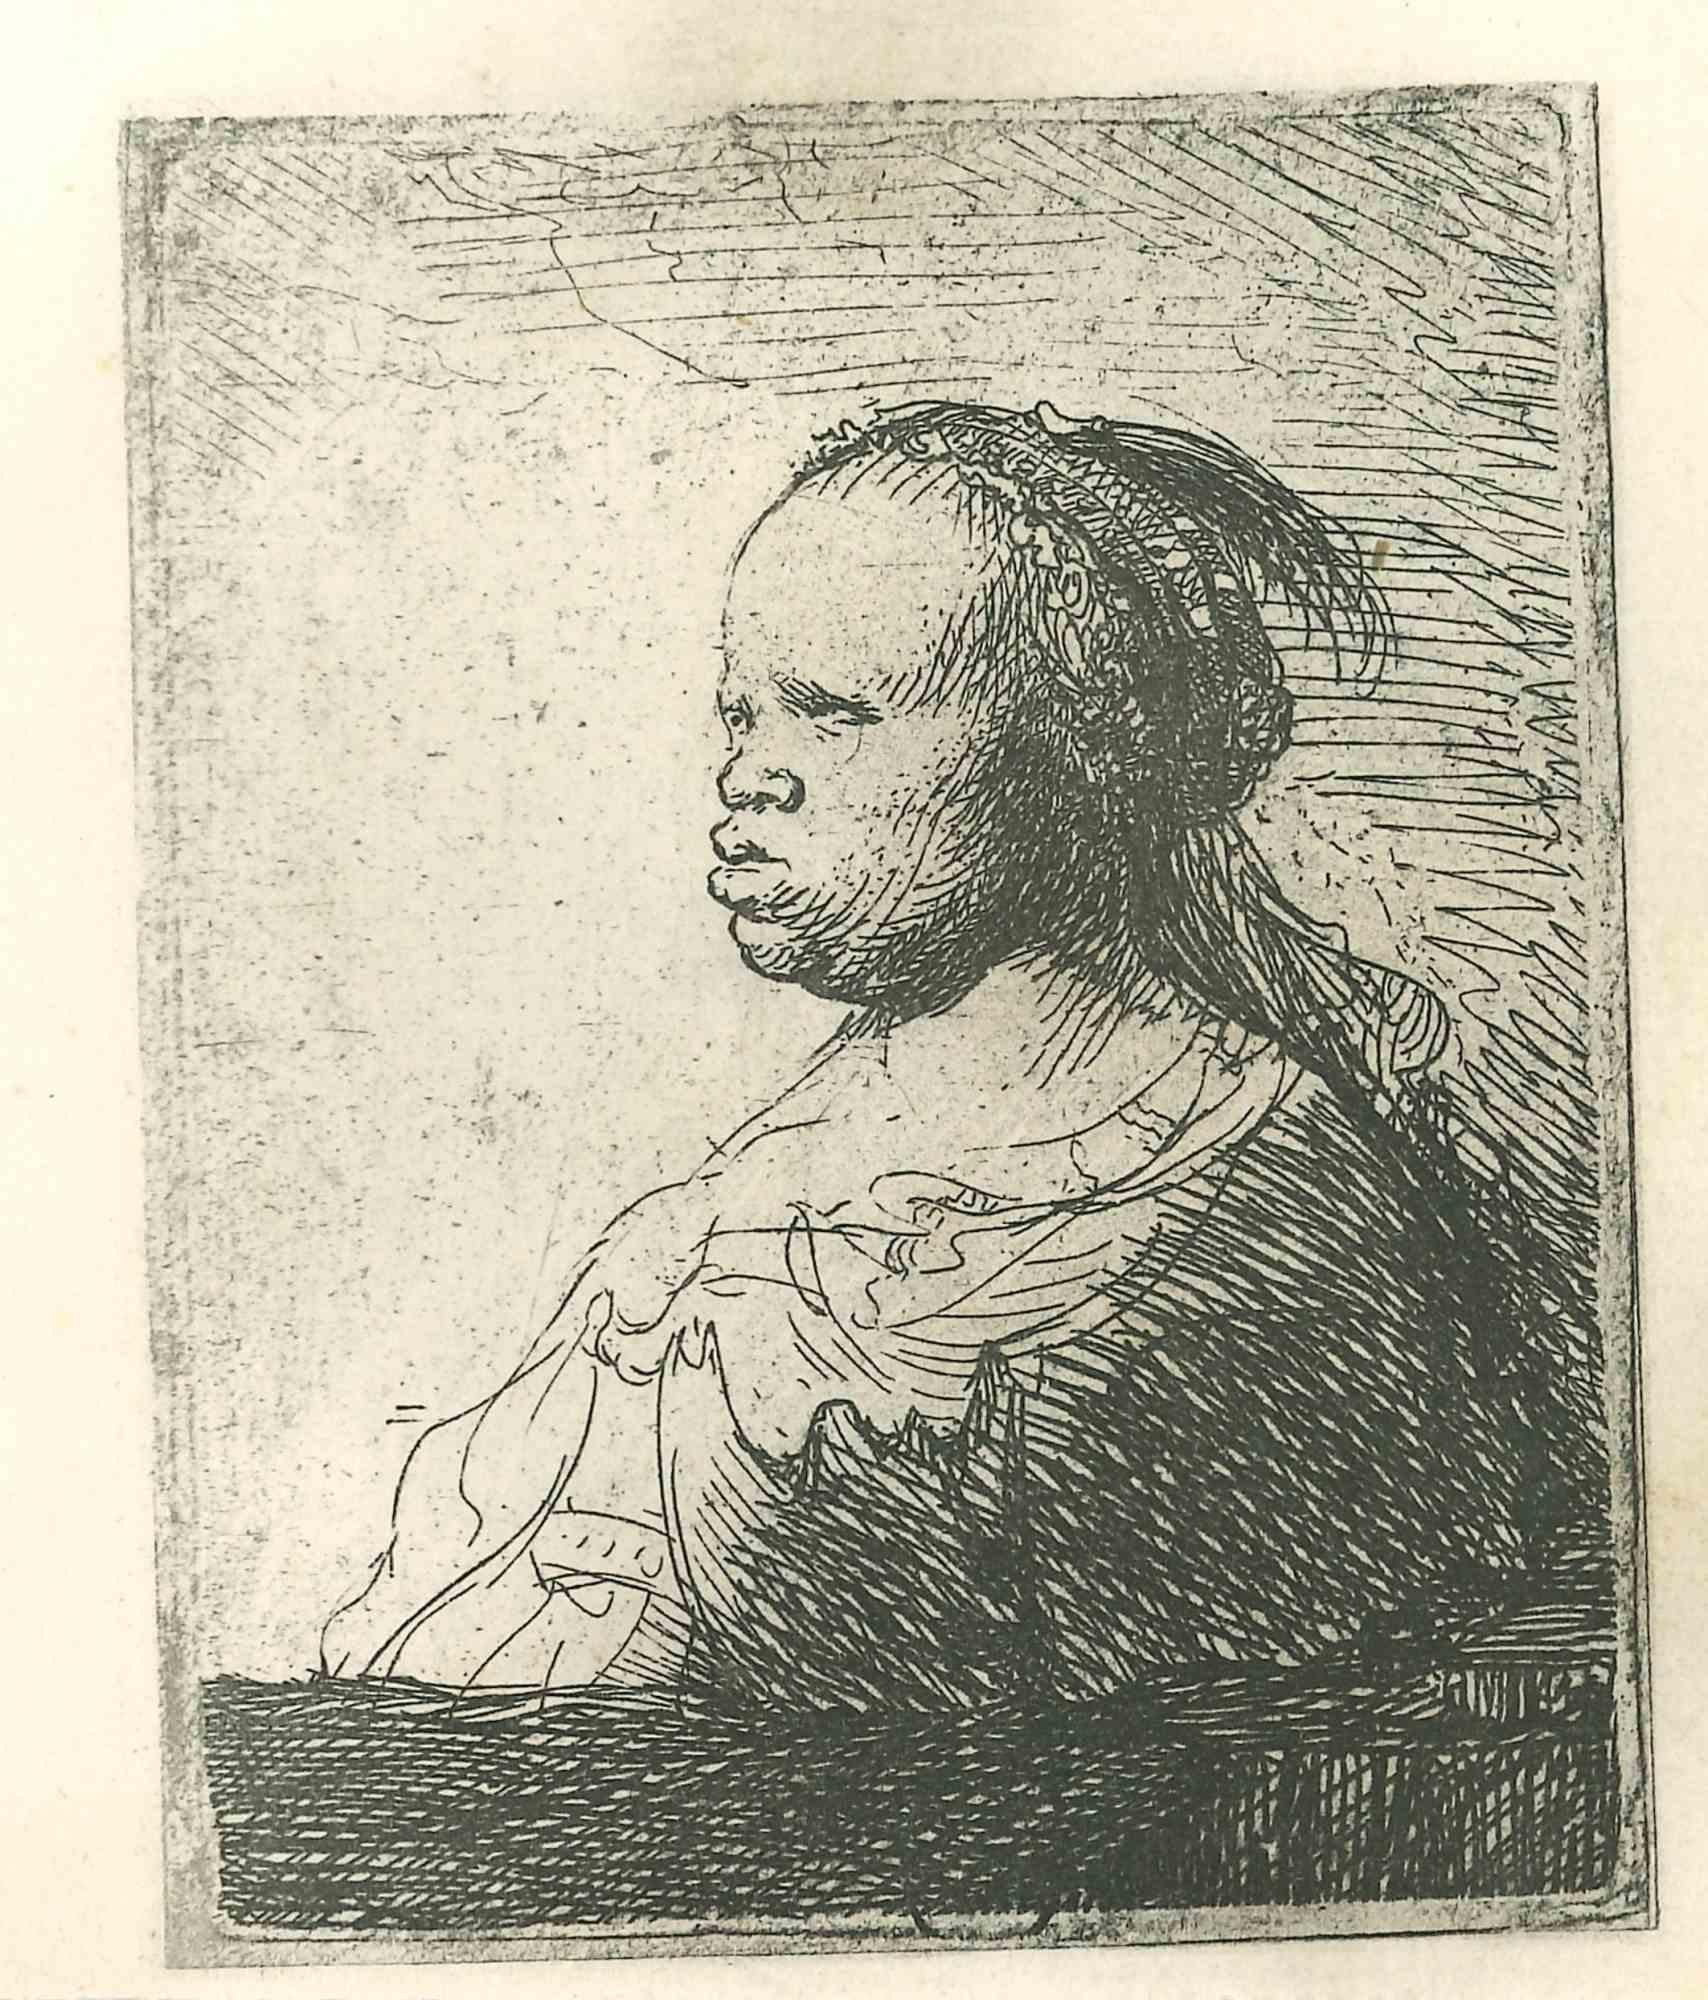 (After) Rembrandt van Rijn  Figurative Print - The White Arab - Etching by Rembrandt - 19th Century